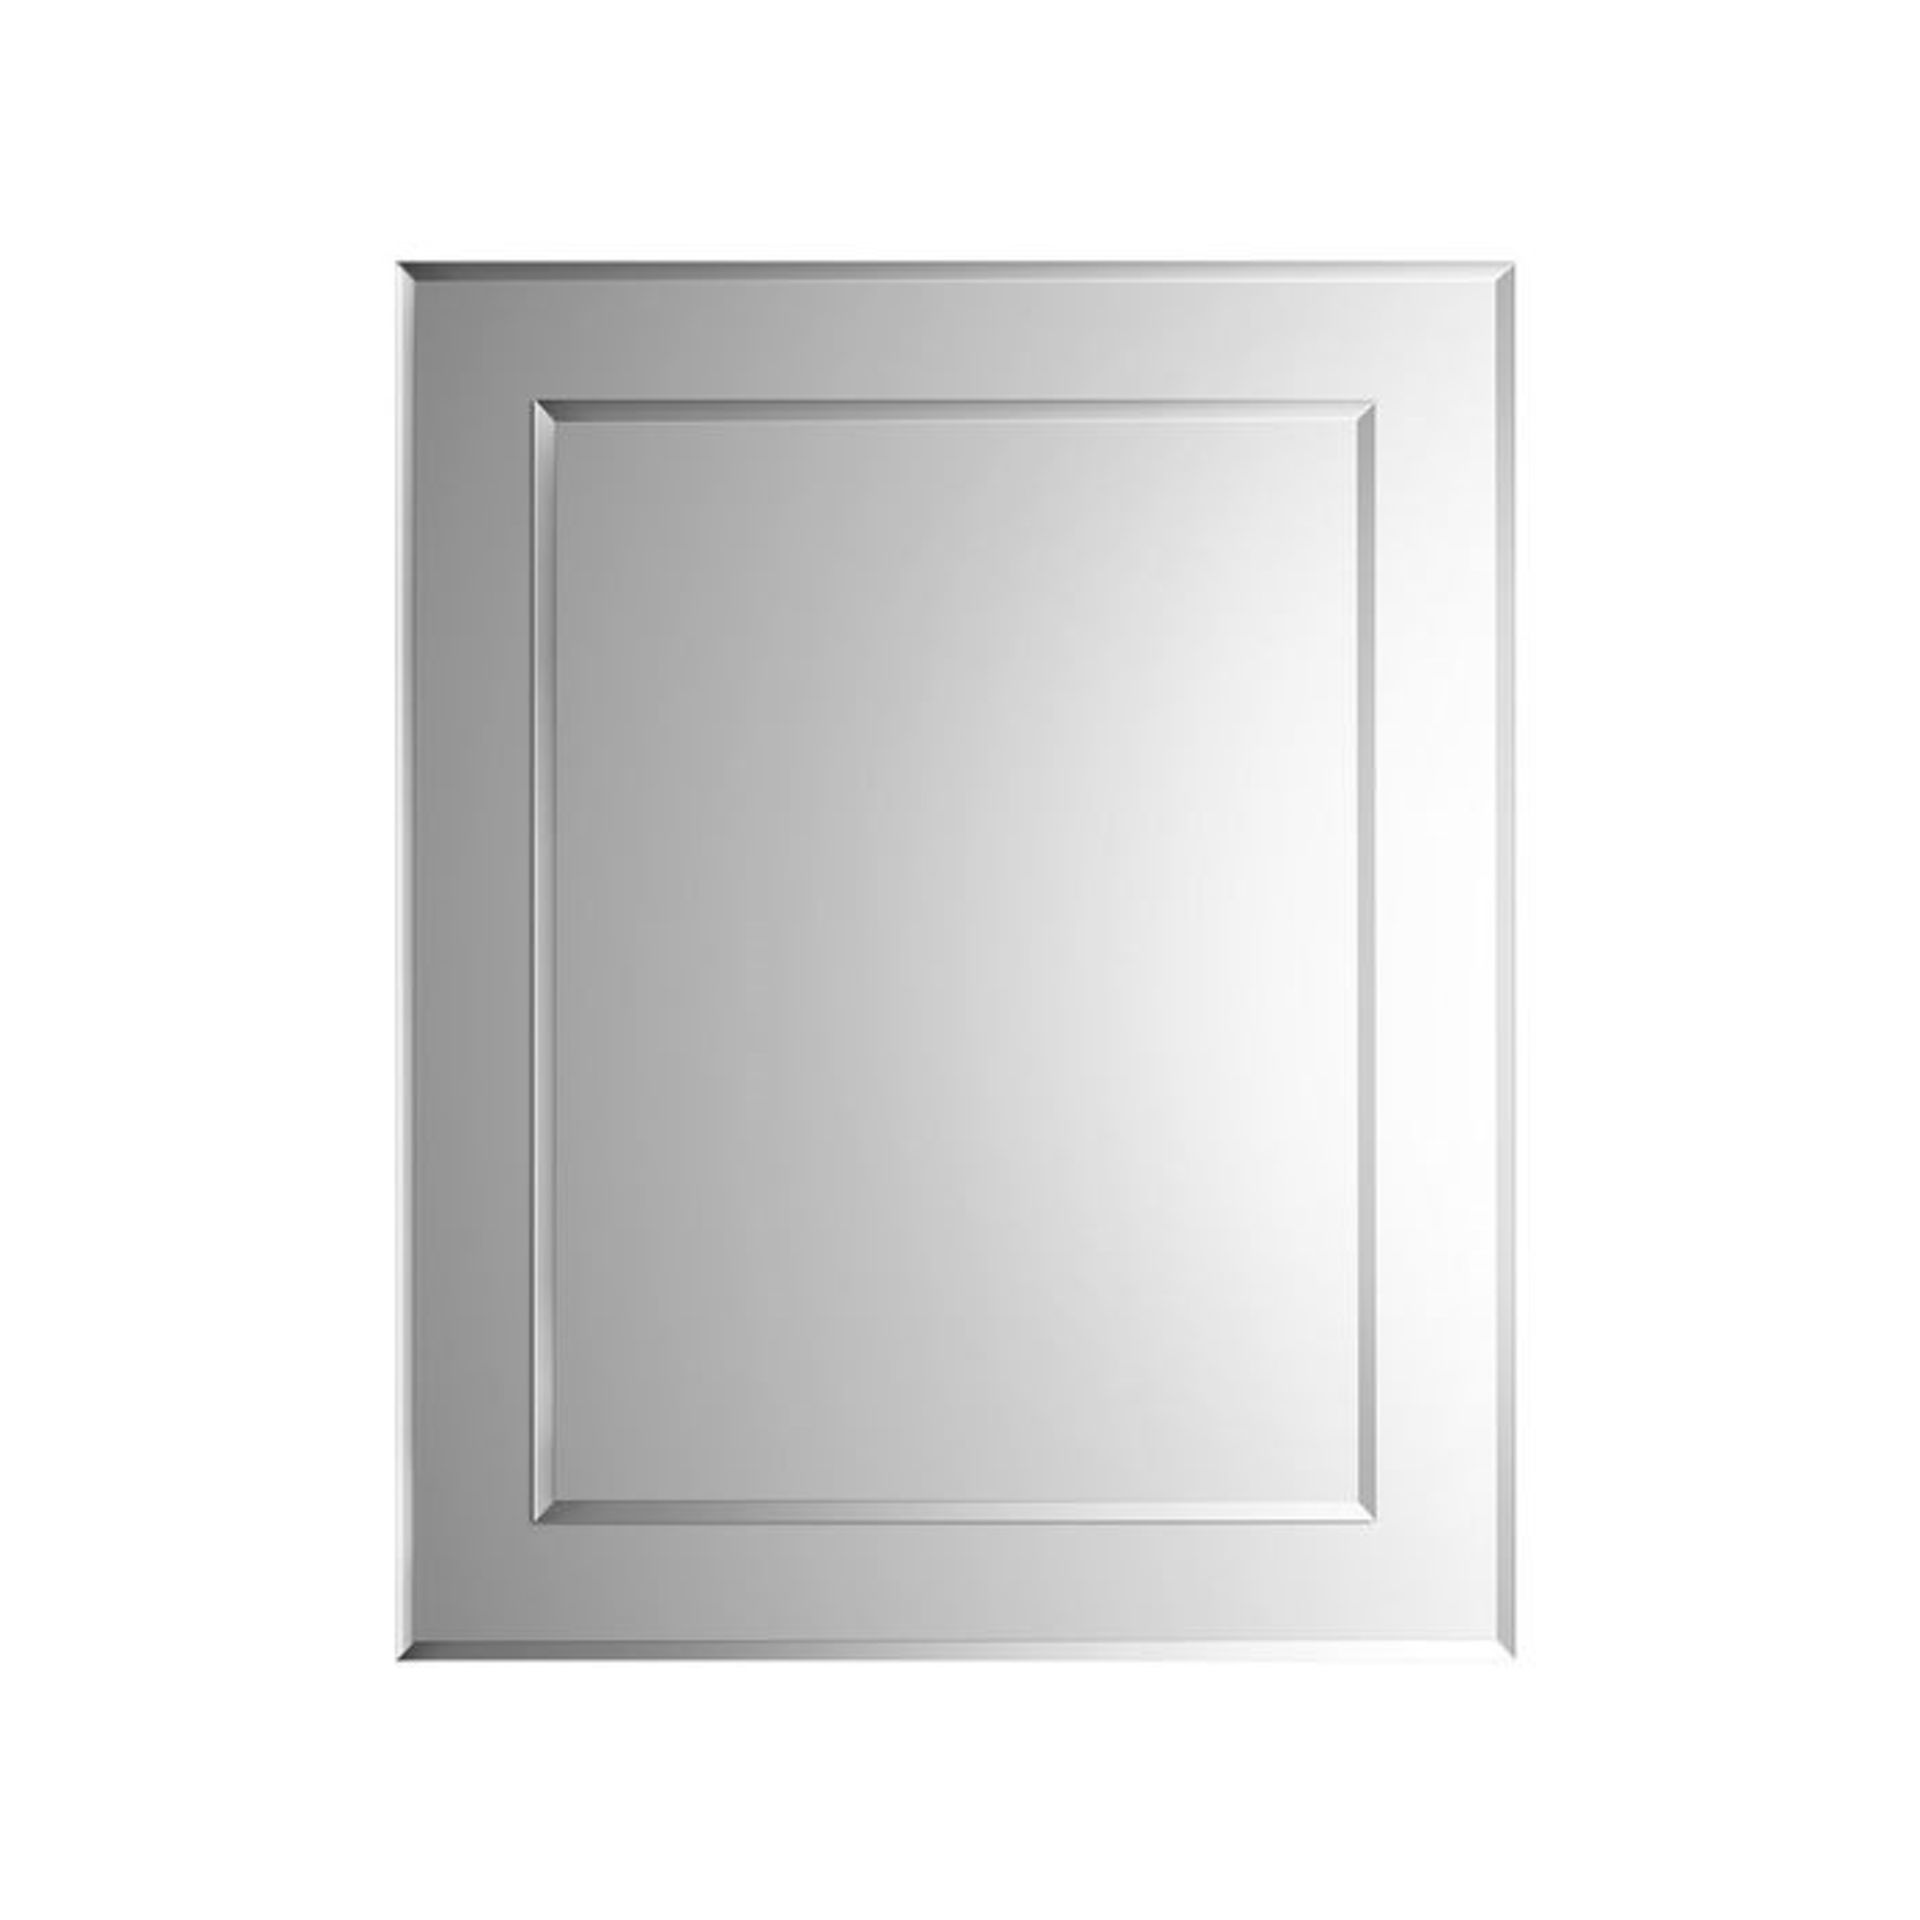 400x500mm Bevel Mirror. Smooth beveled edge for additional safety Supplied fully assembled - Image 2 of 2